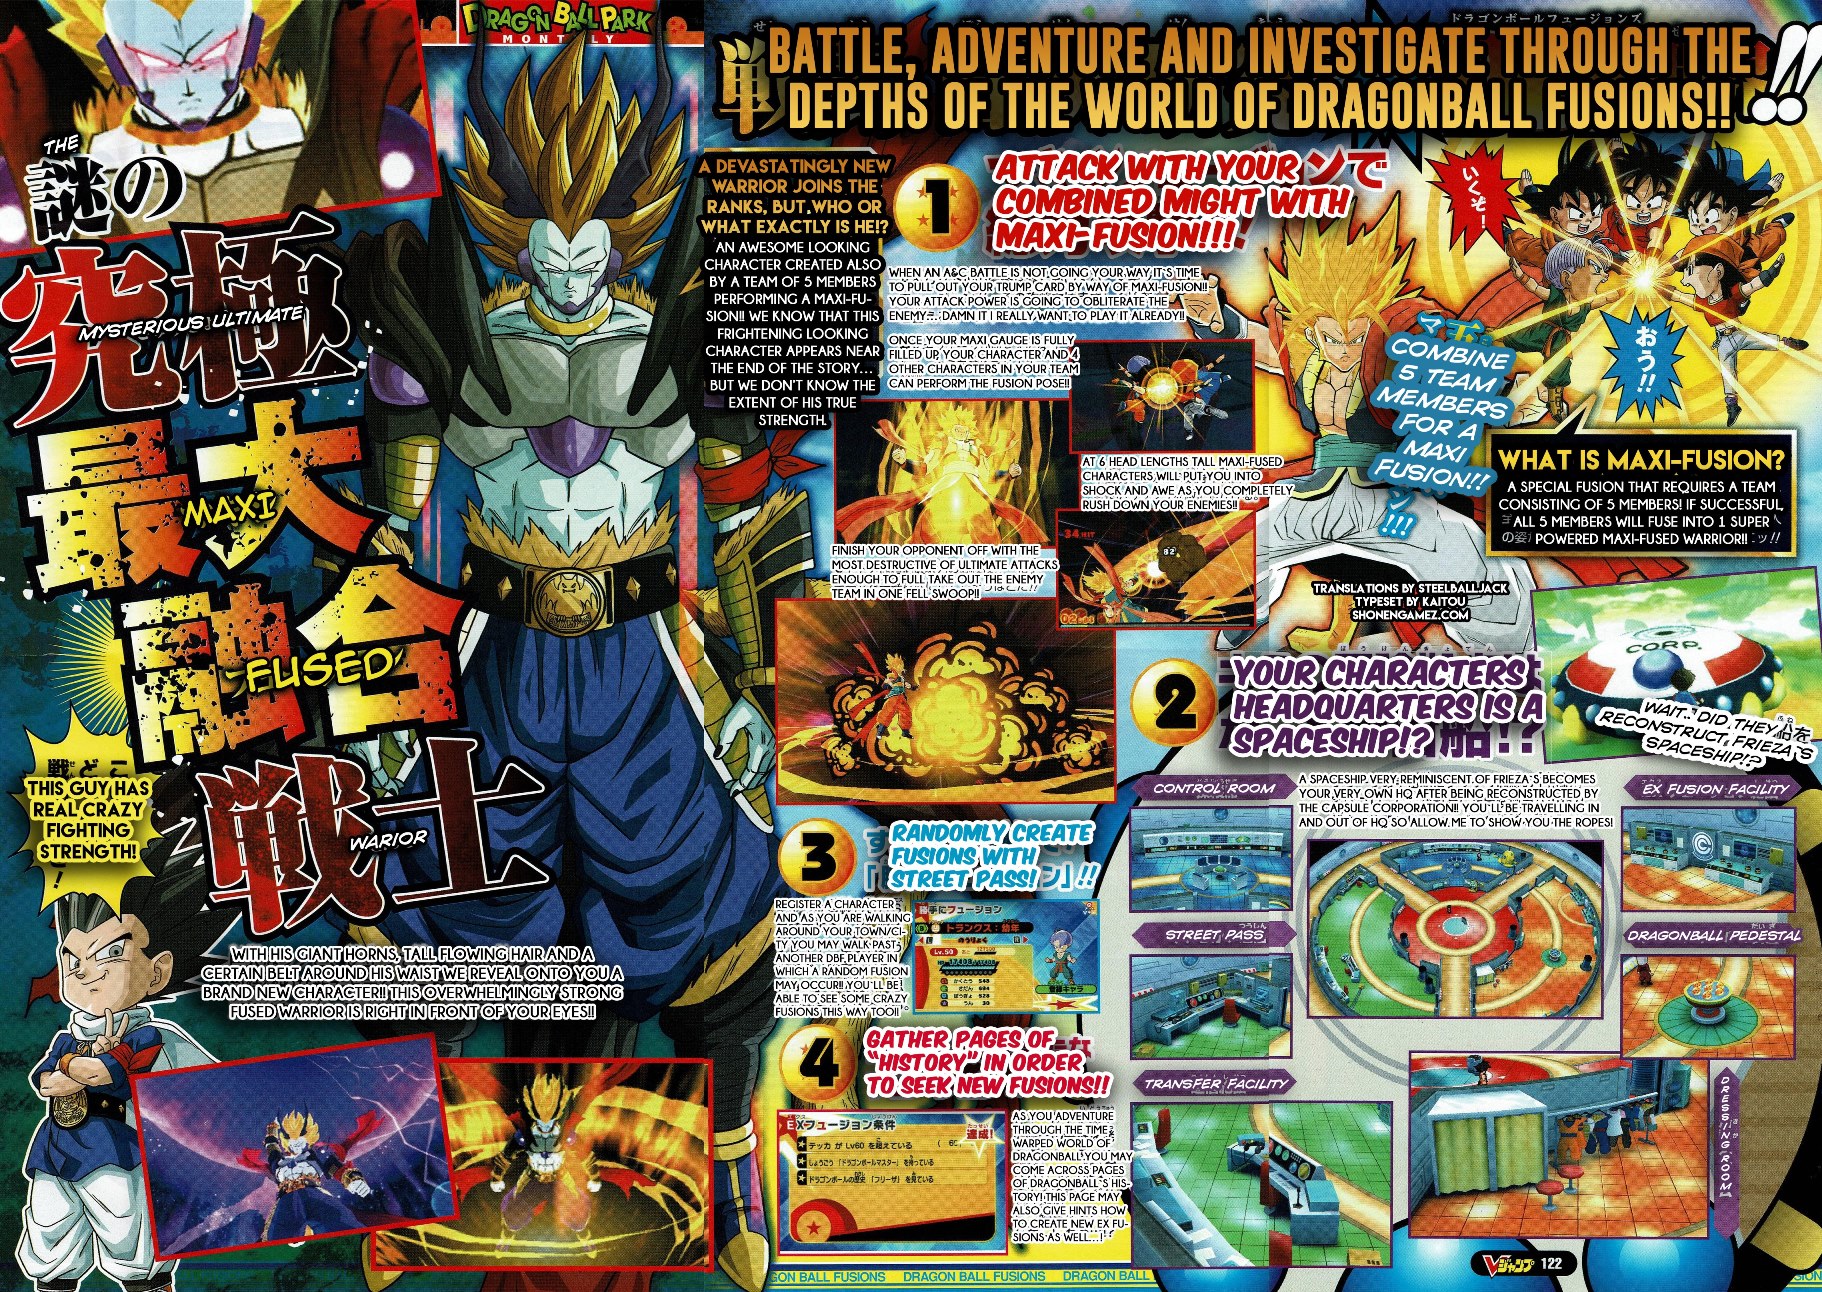 Another Dragon Ball: Fusions scan shows Maxi-Fusion ...